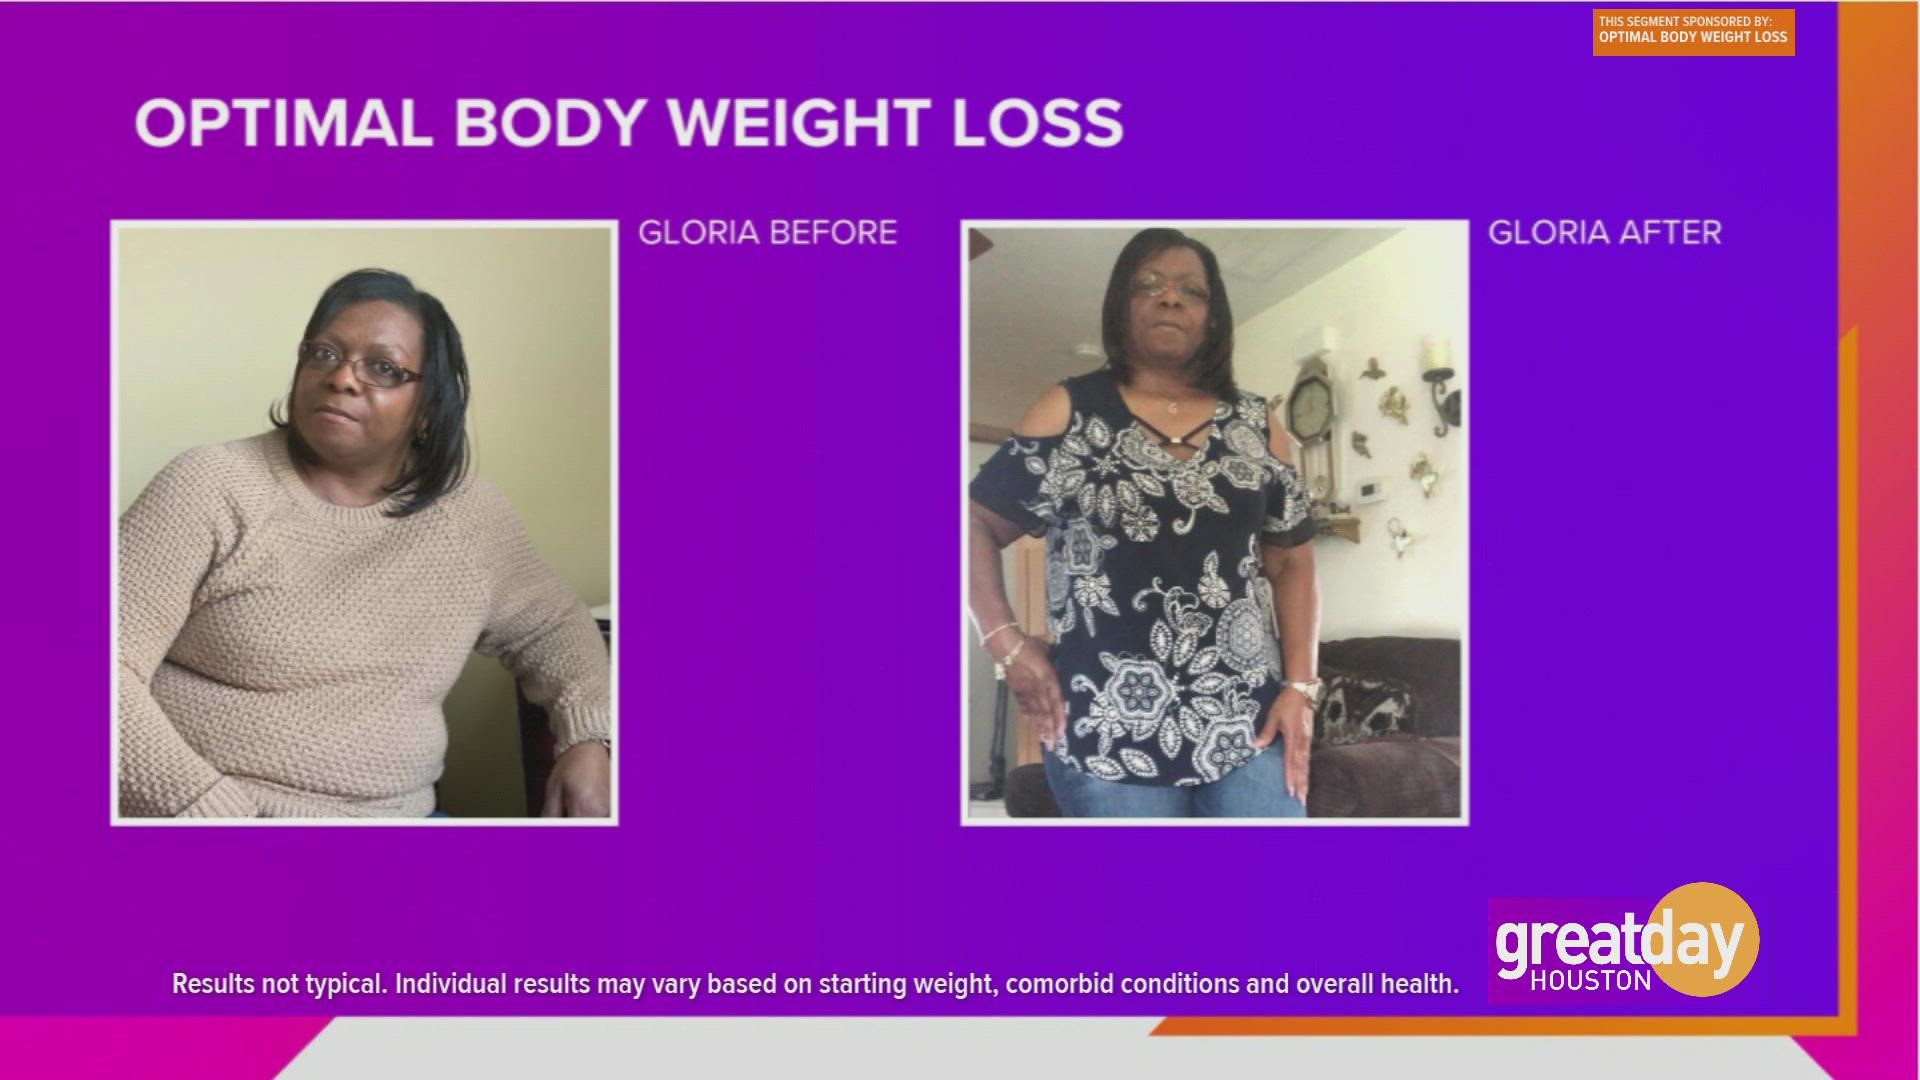 Optimal Body Weight Loss customizes programs specifically for your lifestyle and body